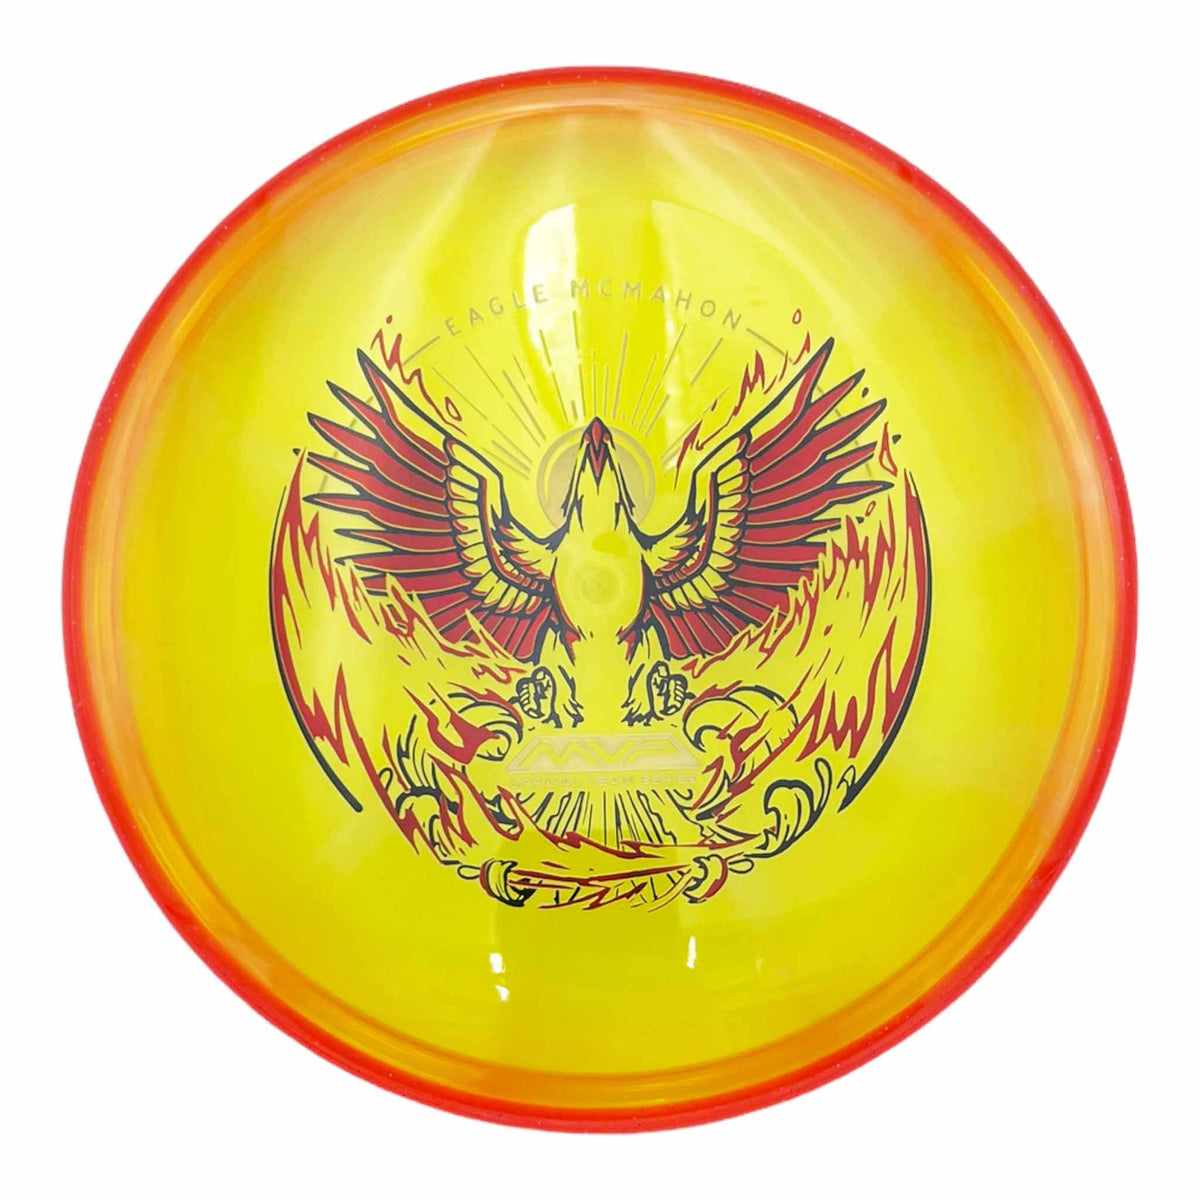 Axiom Discs Prism Proton Eagle McMahon Envy putter and approach - Yellow / Orange